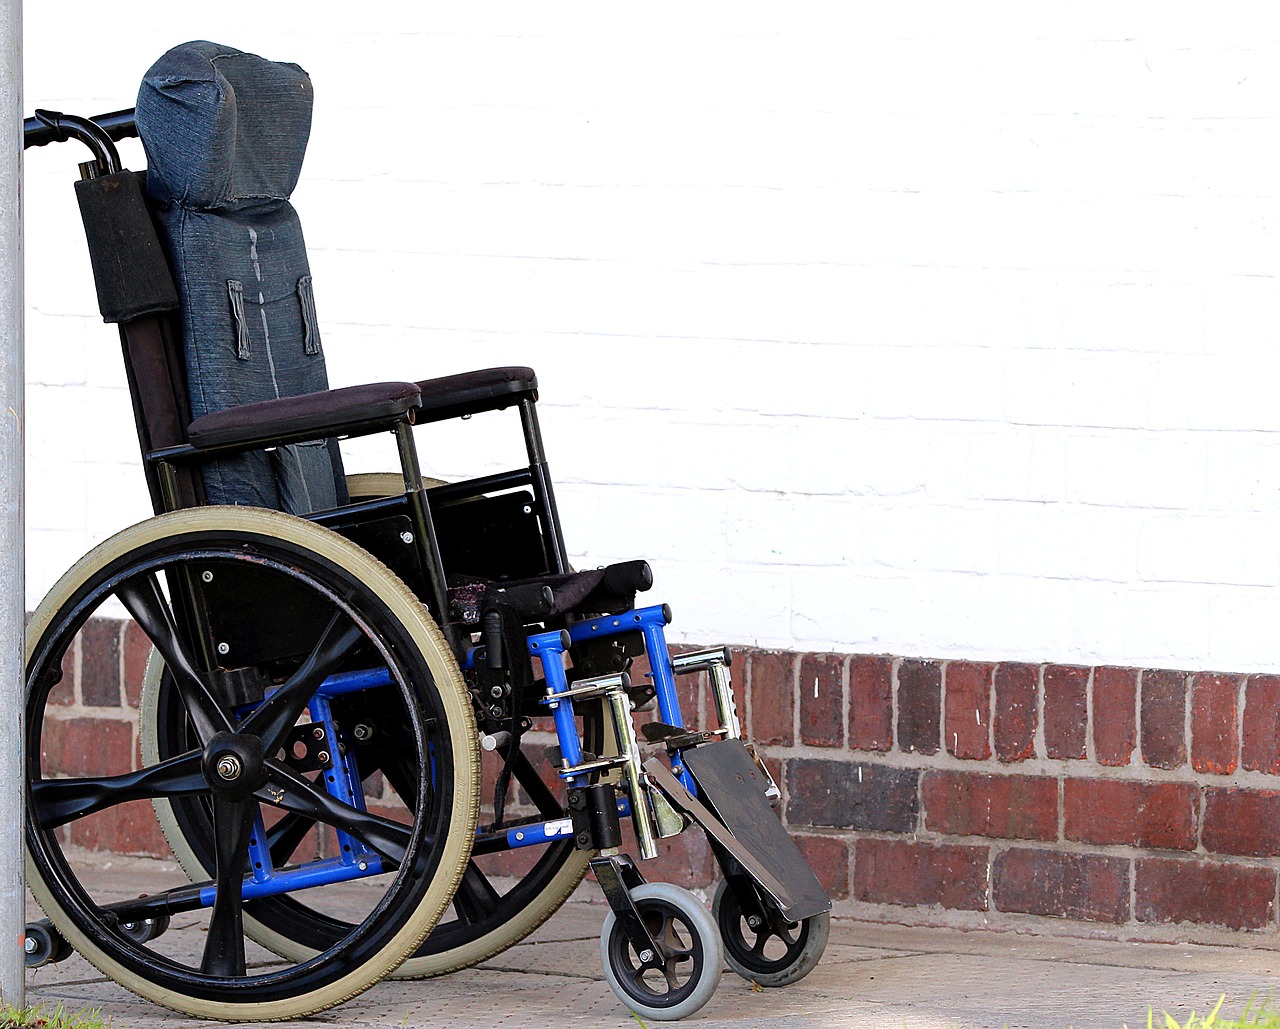 Ohio Disability Workers' Compensation